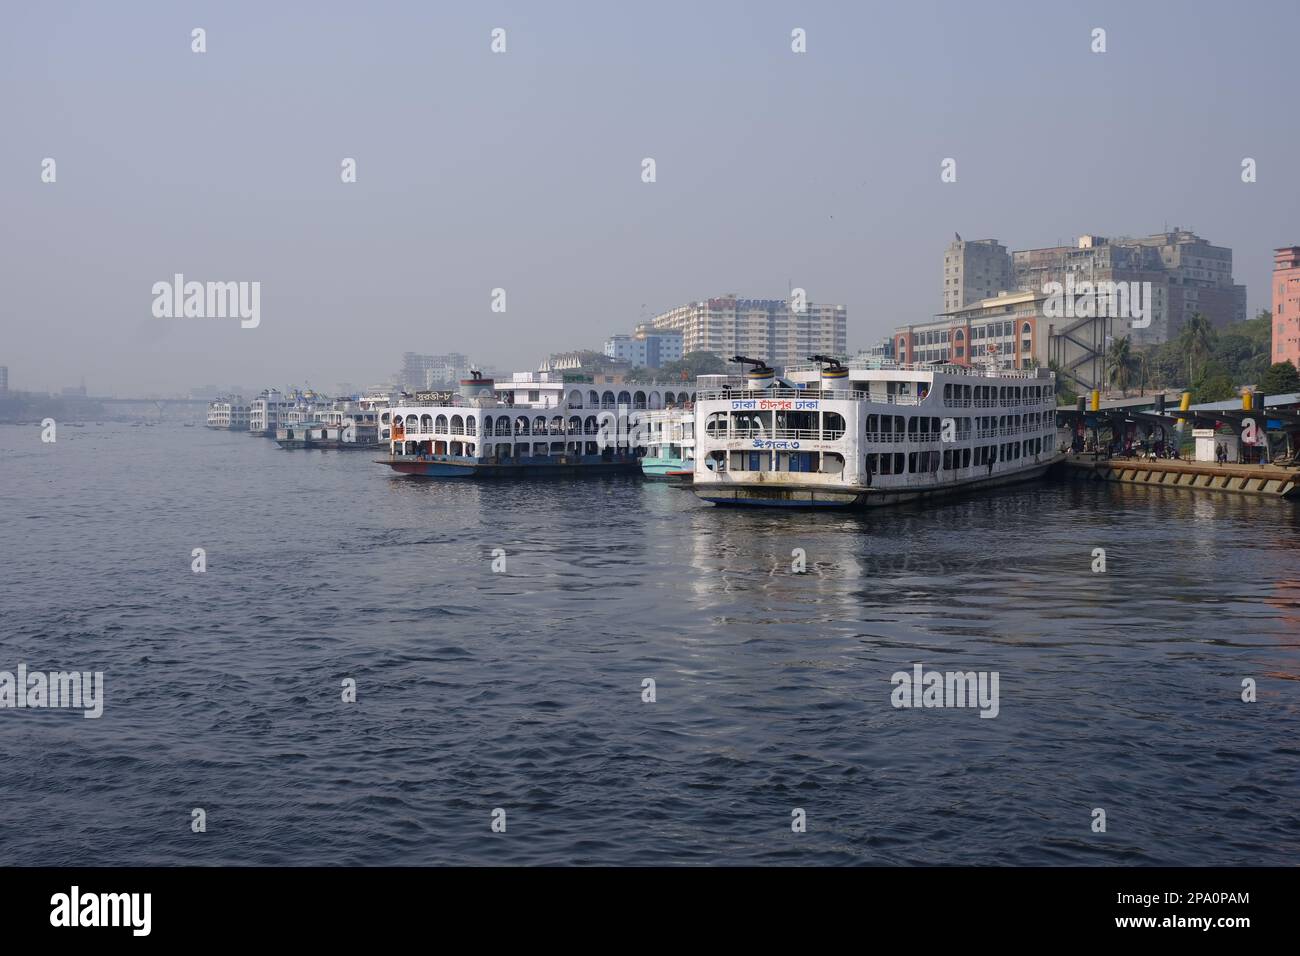 Sadarghat, the main river port of Bangladesh. From here the launches go to various destinations in Southern districts. Some launches are seen anchored Stock Photo